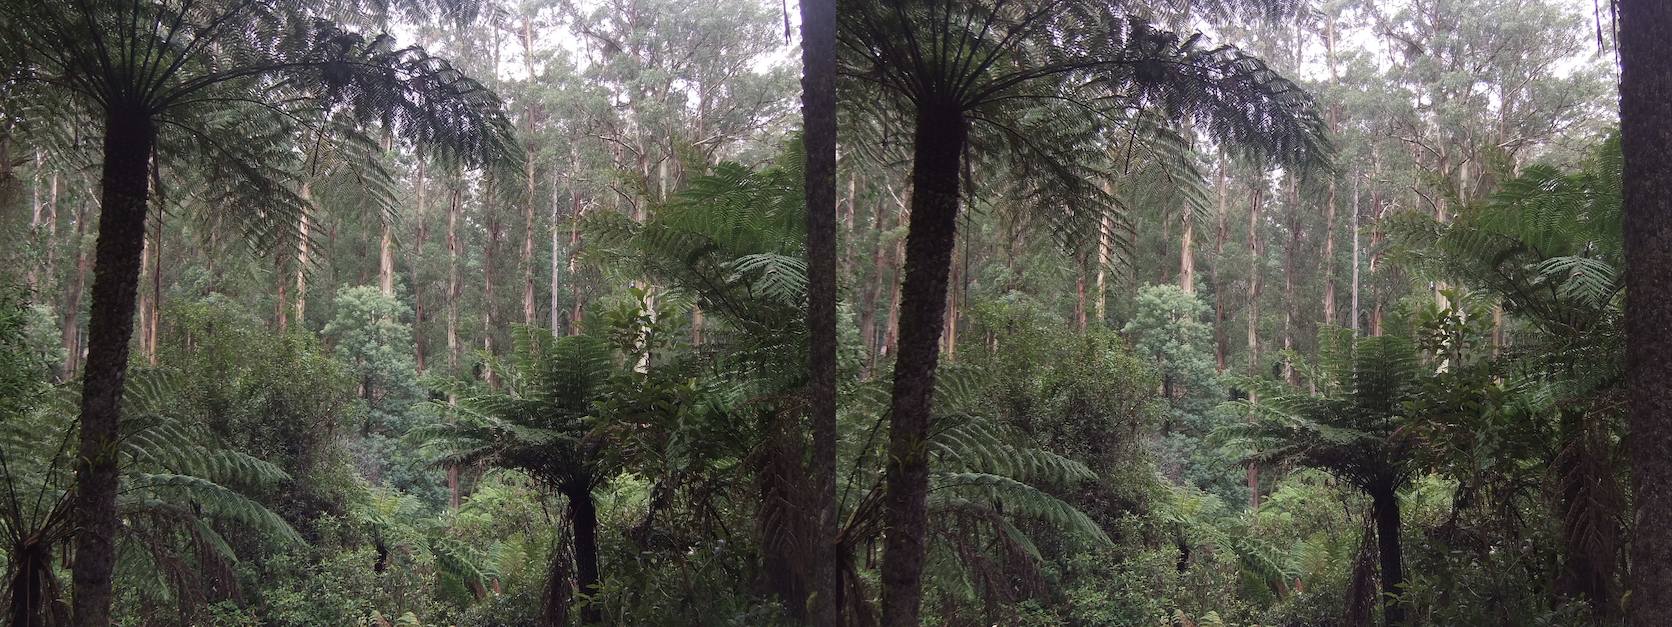 Two images of a temperate rain forest side-by-side